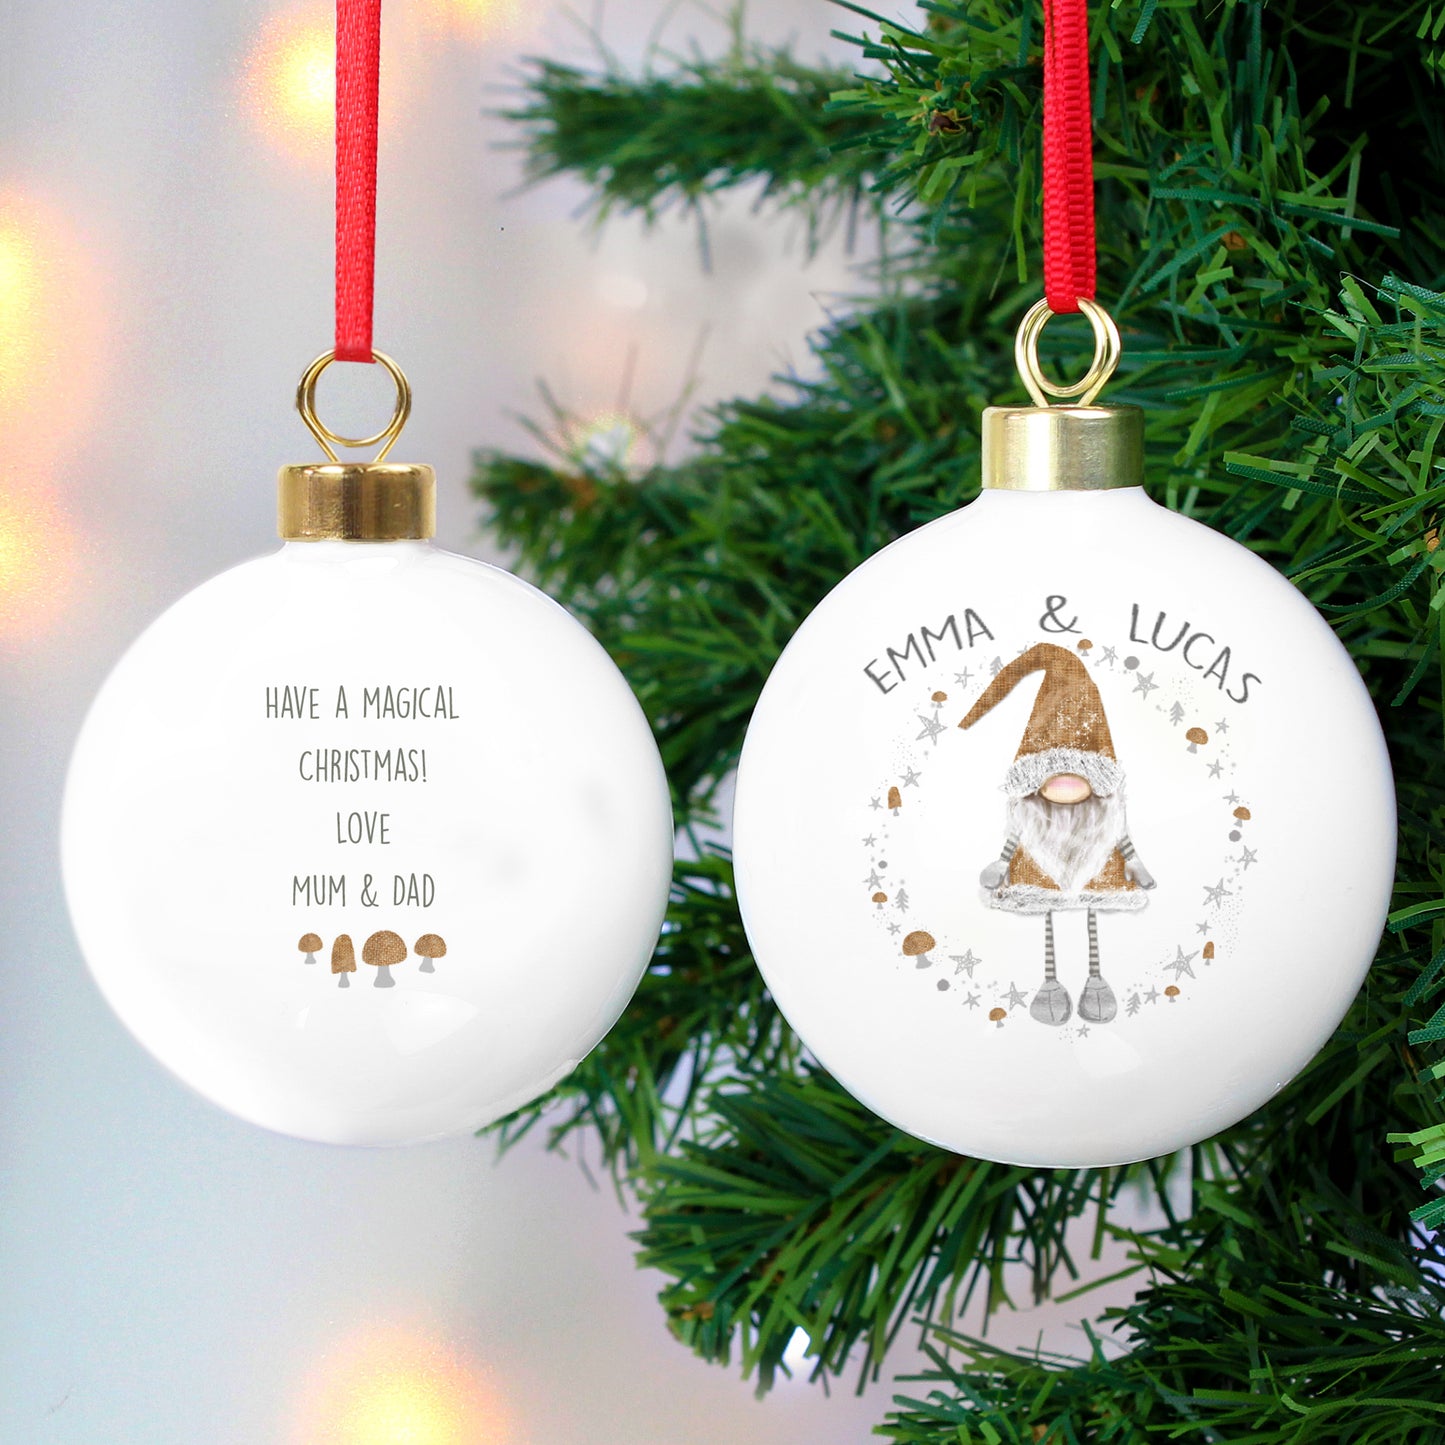 A Christmas gonk bauble in fawn and white tones from Lilybet loves